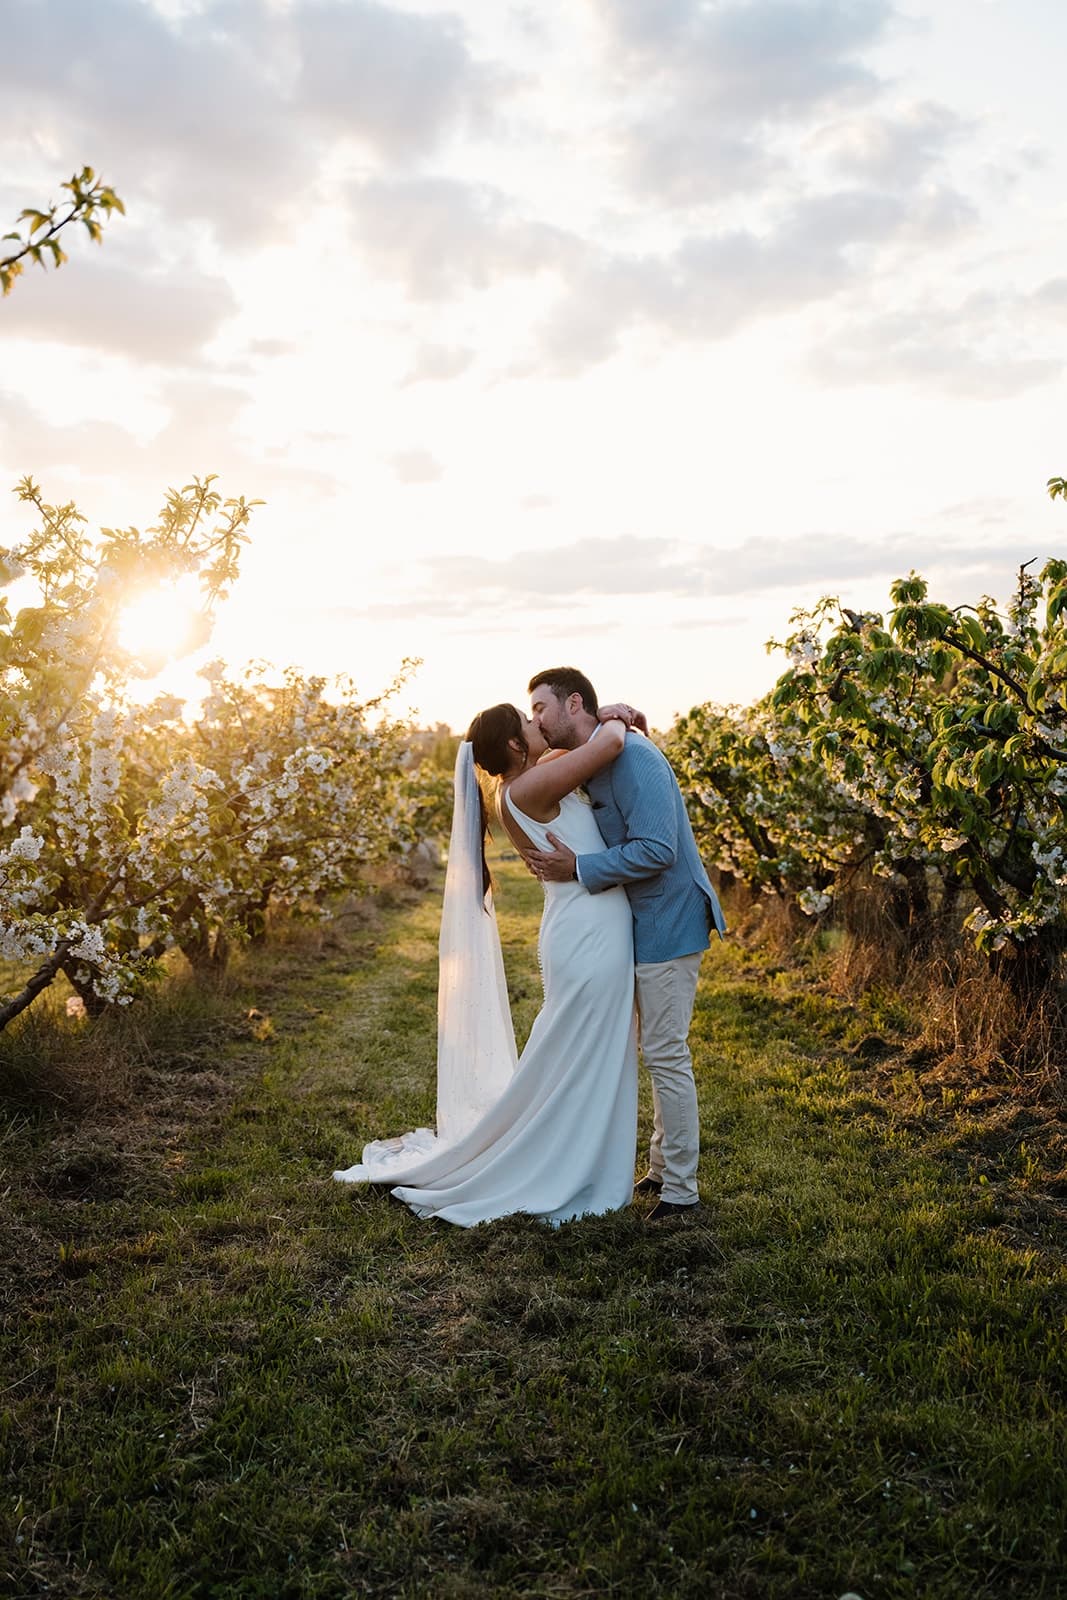 A Fairytale Wedding: Charlotte & Anthony Tie the Knot in Orange NSW